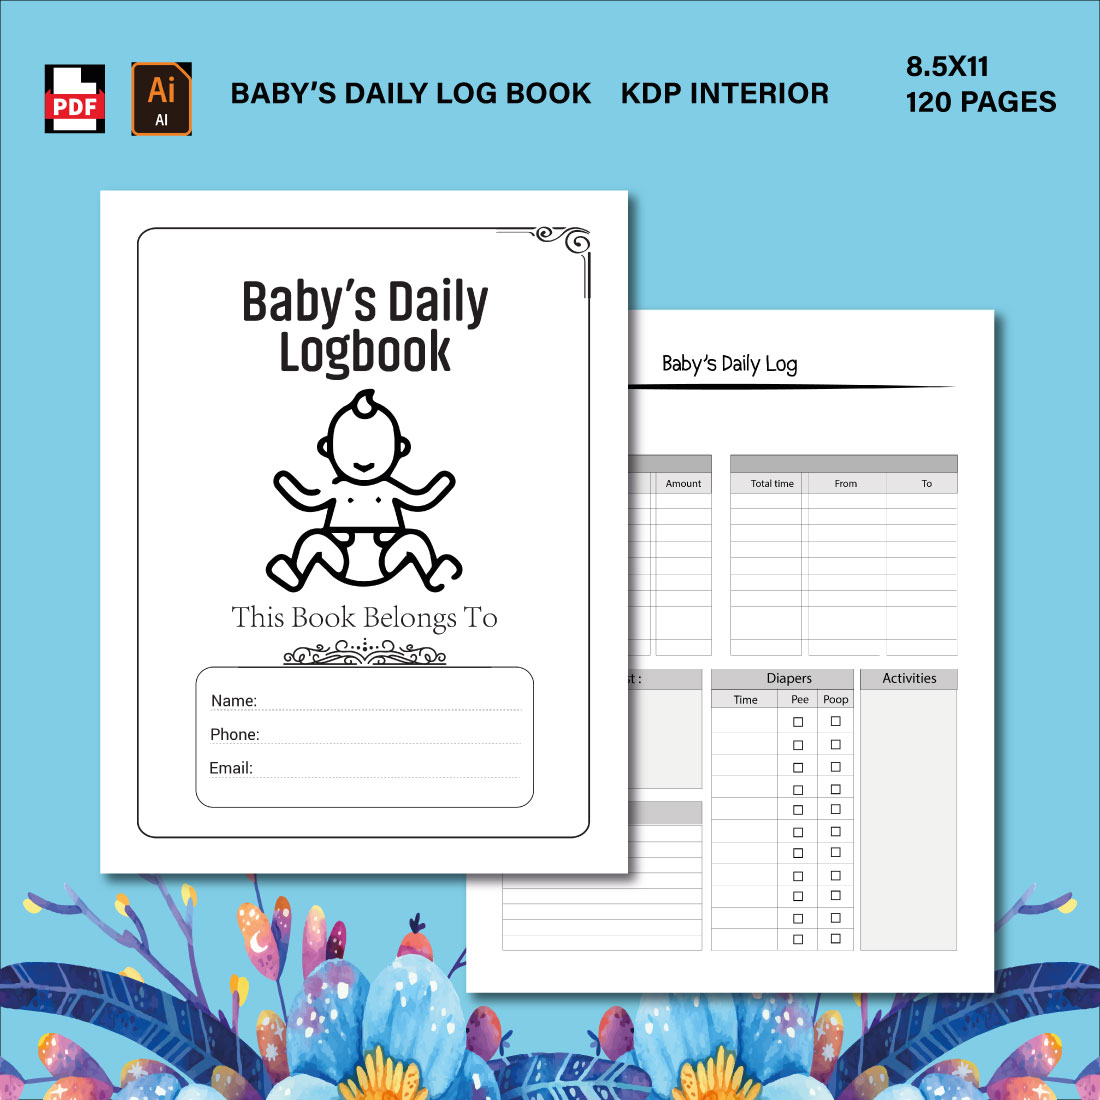 Baby's Daily Log Book - KDP Interior cover image.